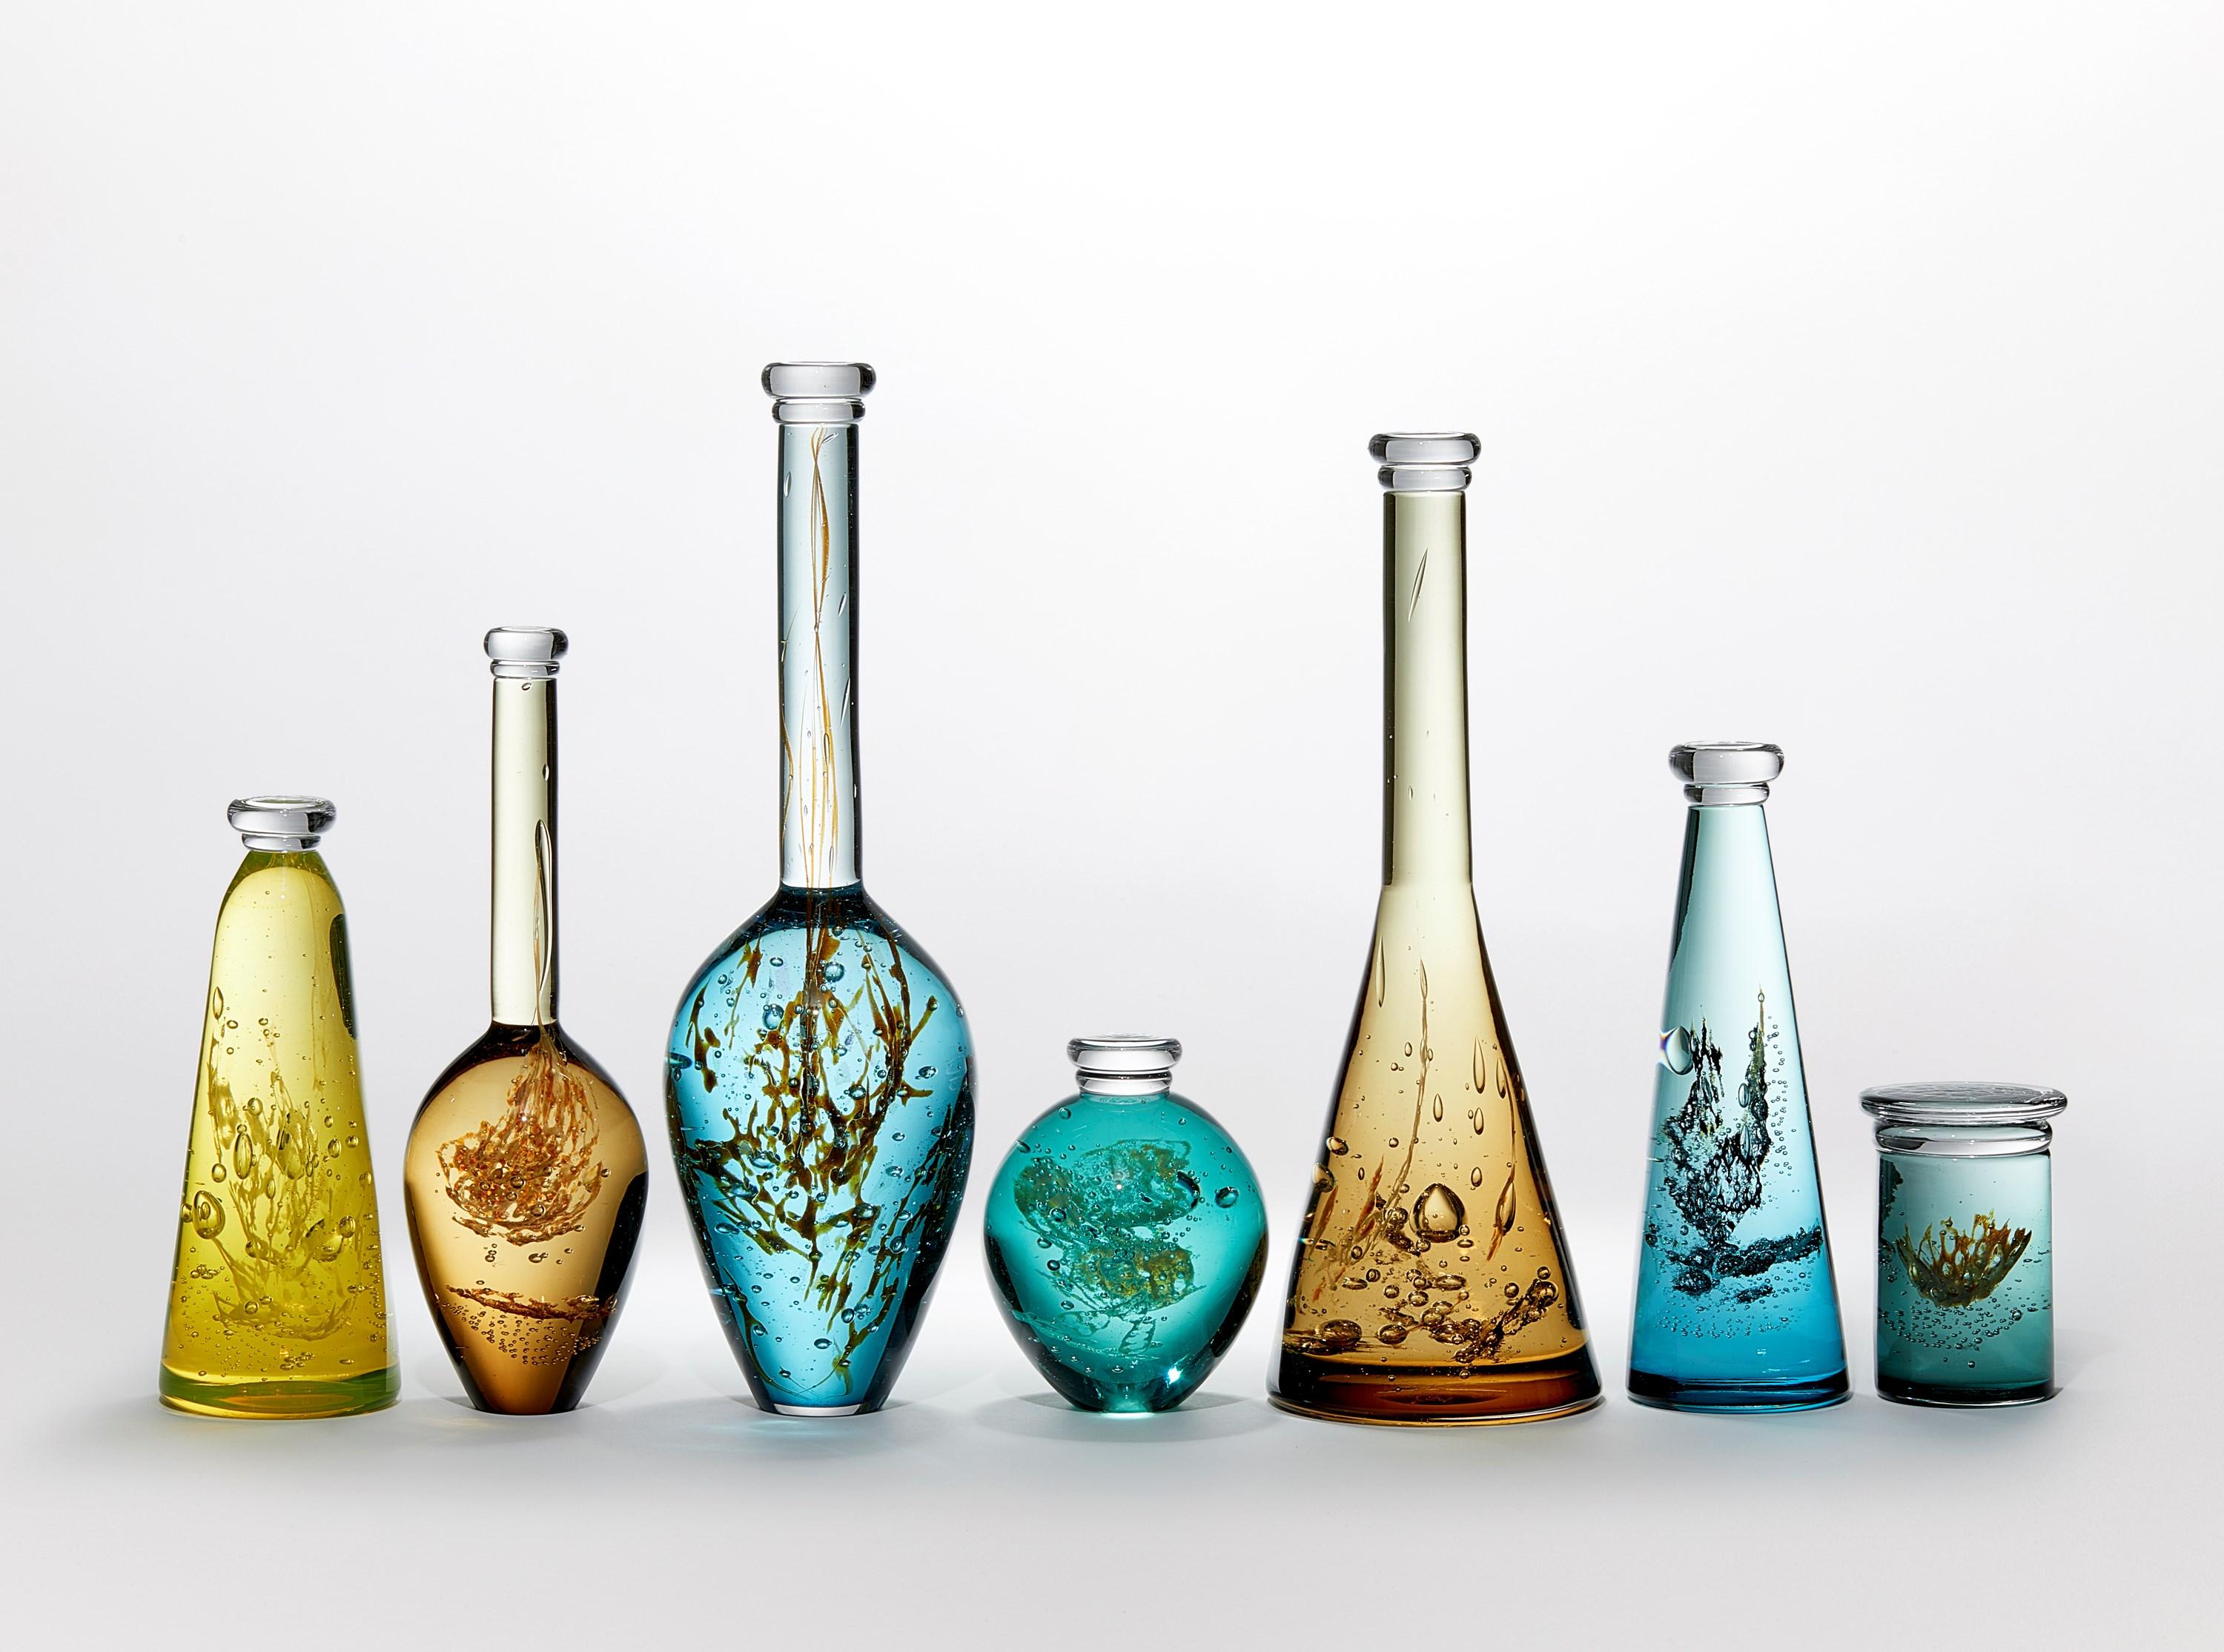 'Stills of Life Chronicles' is a unique glass installation (consisting of 7 individual elements) created in collaboration by the artists, Louis Thompson and Prathibha Mistry.

Accomplished glass artist Thompson explores illusion and the perceptions